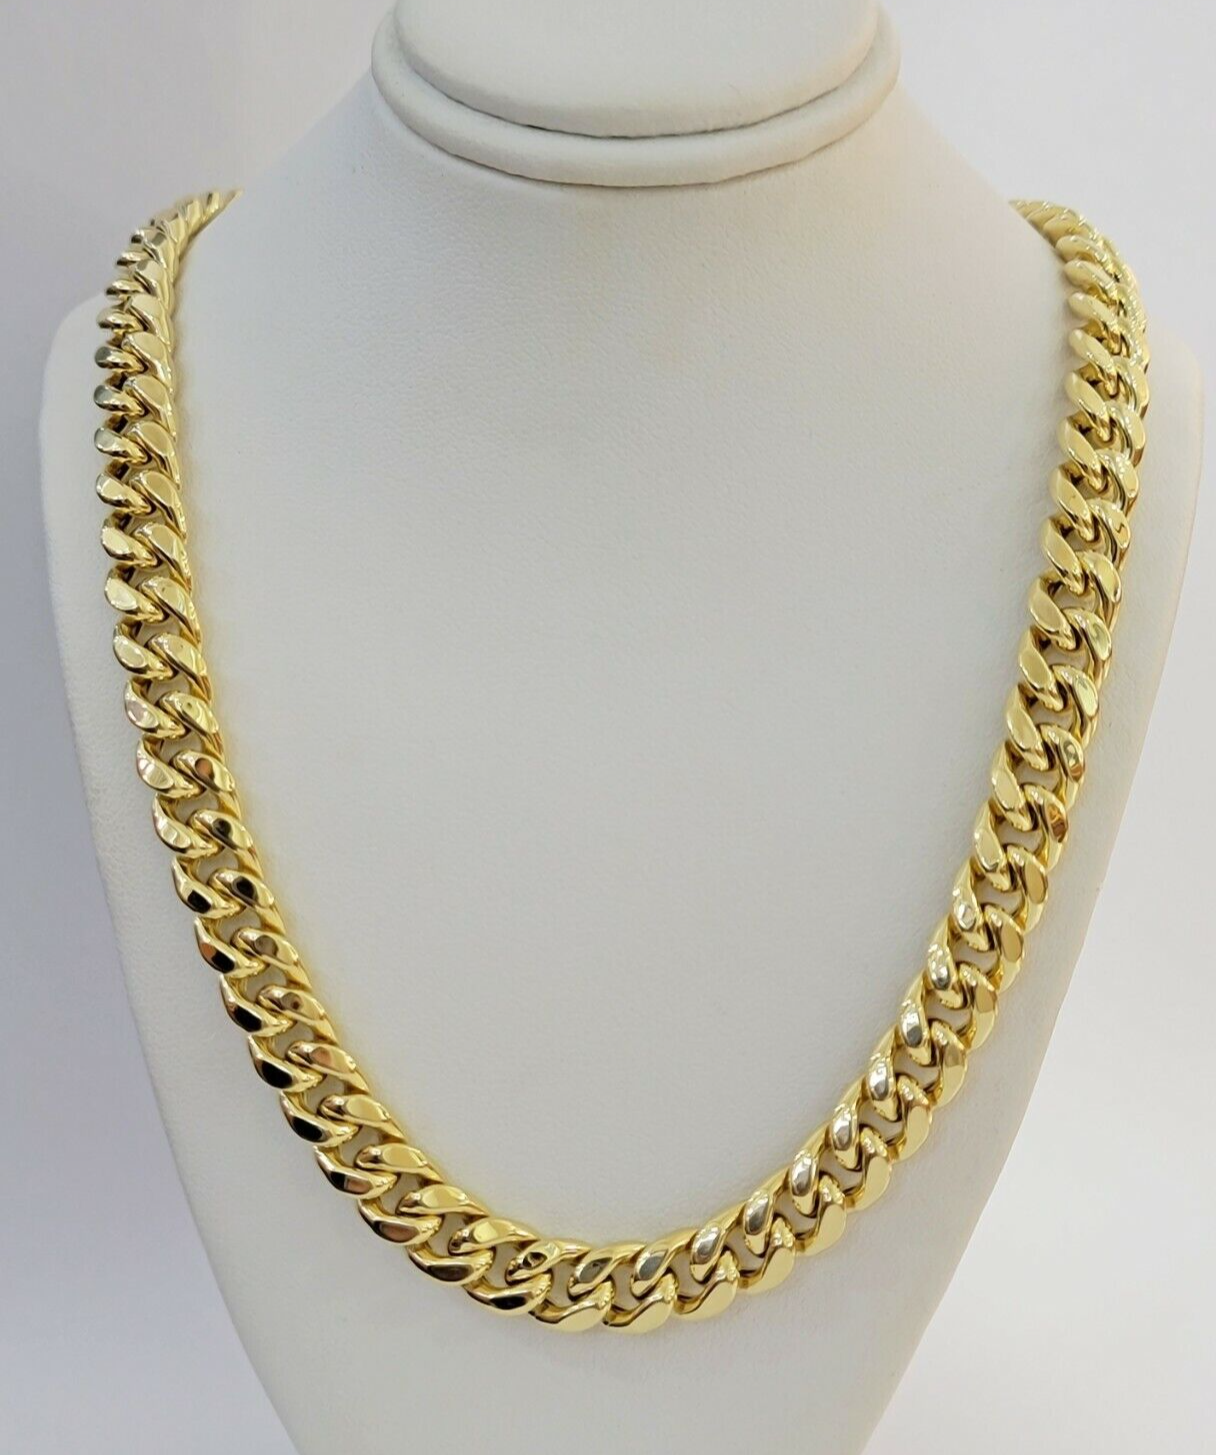 Real 10k Gold Chain Necklace 9mm 26 Inch Miami Cuban Link Strong Men's 10KT Gold